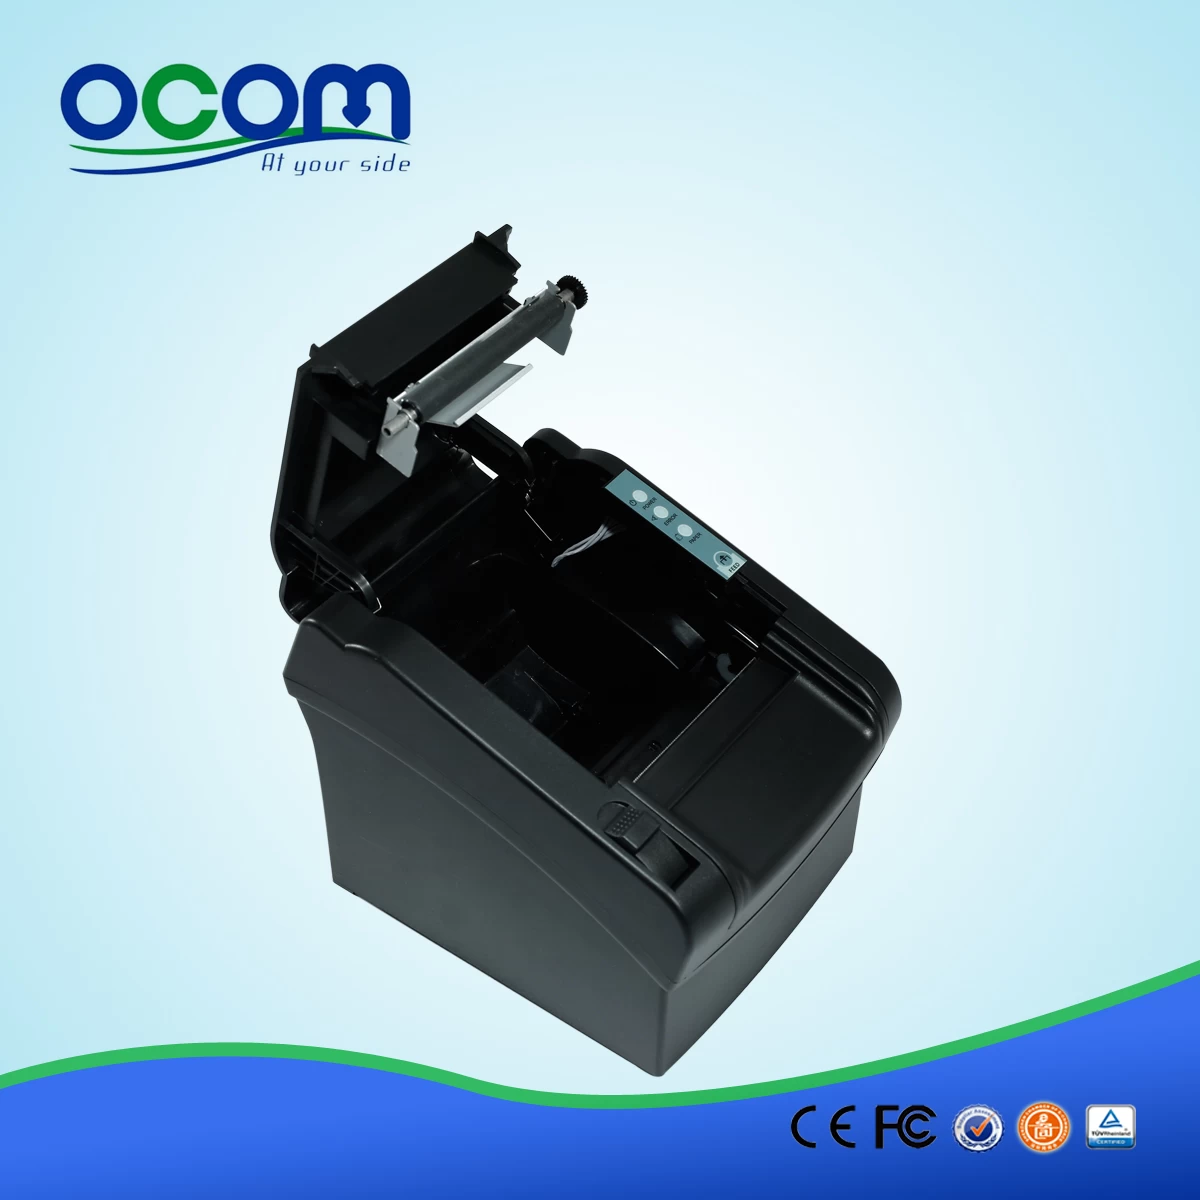 high quality 80mm thermal pos printer for receipt (OCPP-802)